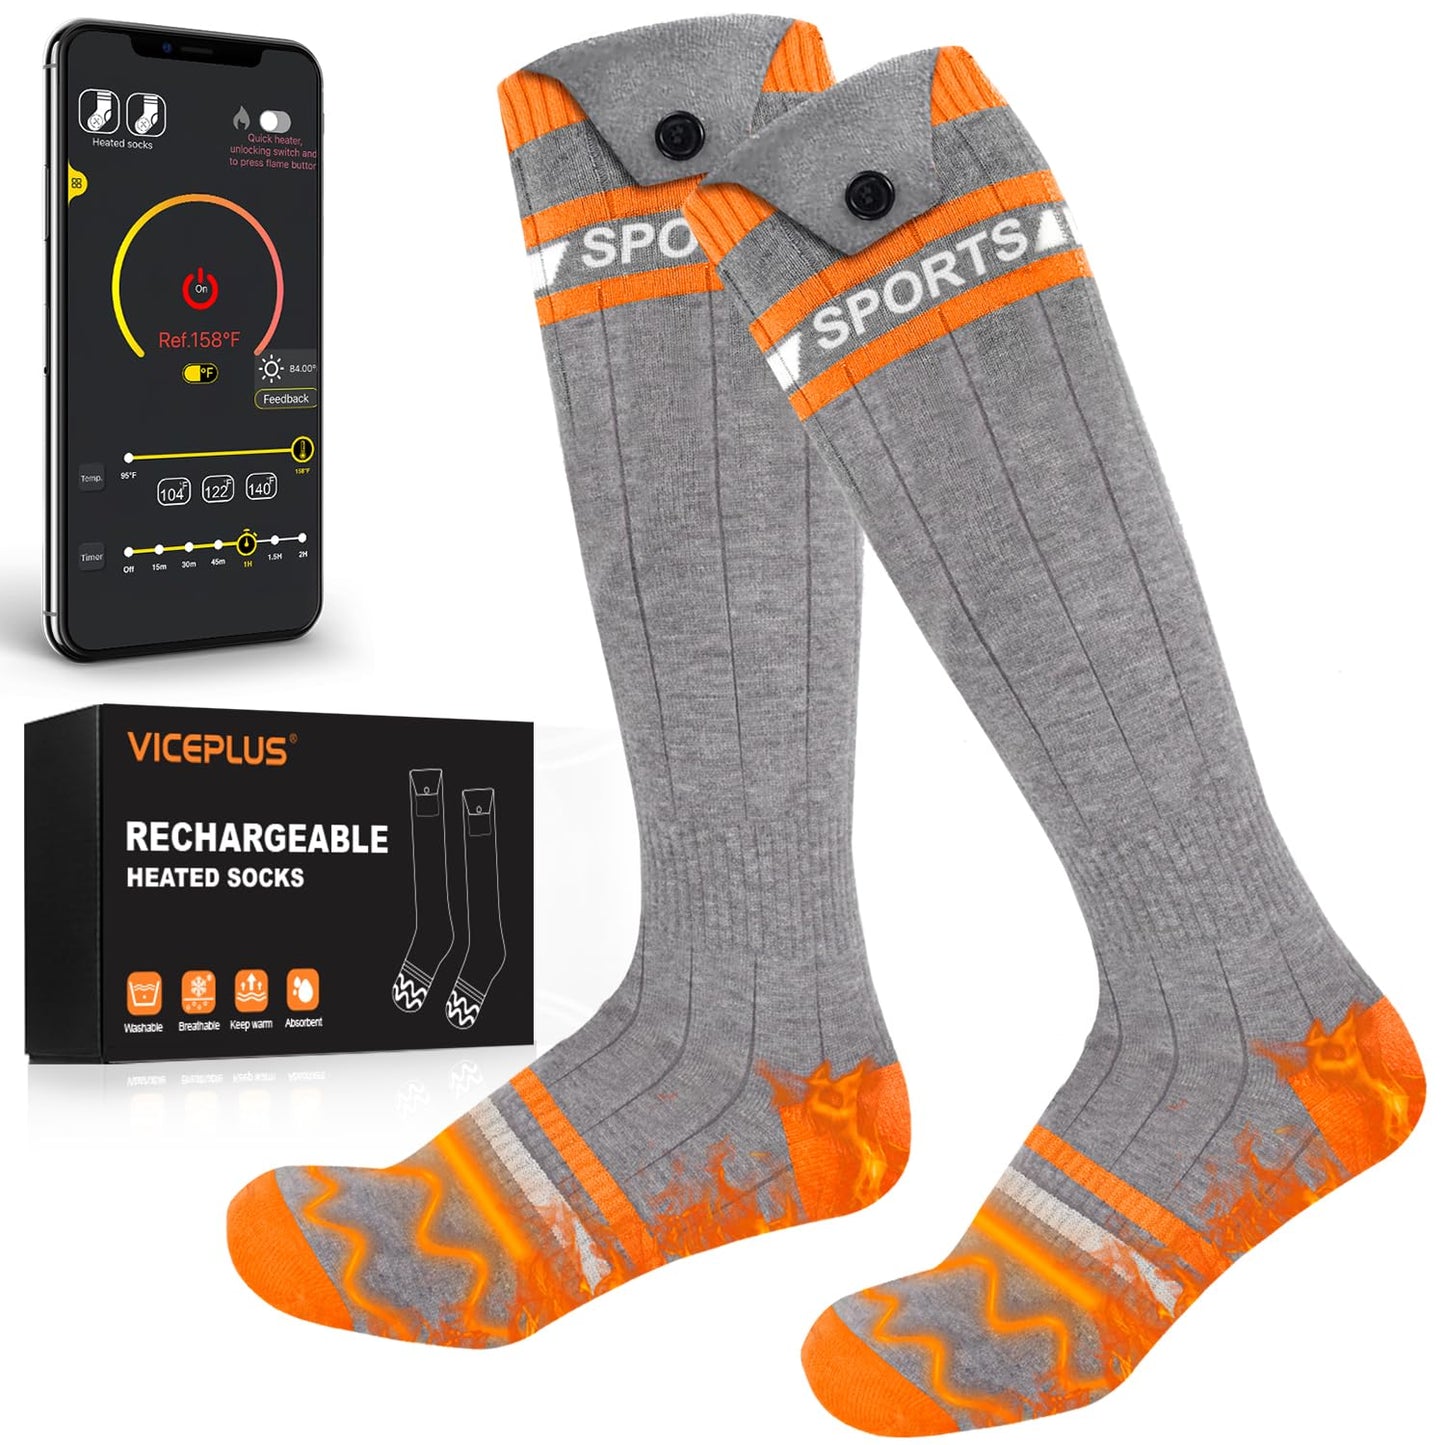 Heated Socks for Men Women Electric Heated Socks for Men Rechargeable 5000mAh*2 Battery Heated Ski Socks APP Control Thermal Socks Washable Heated Socks for Winter Camping Skiing Hunting Hiking Outdoors